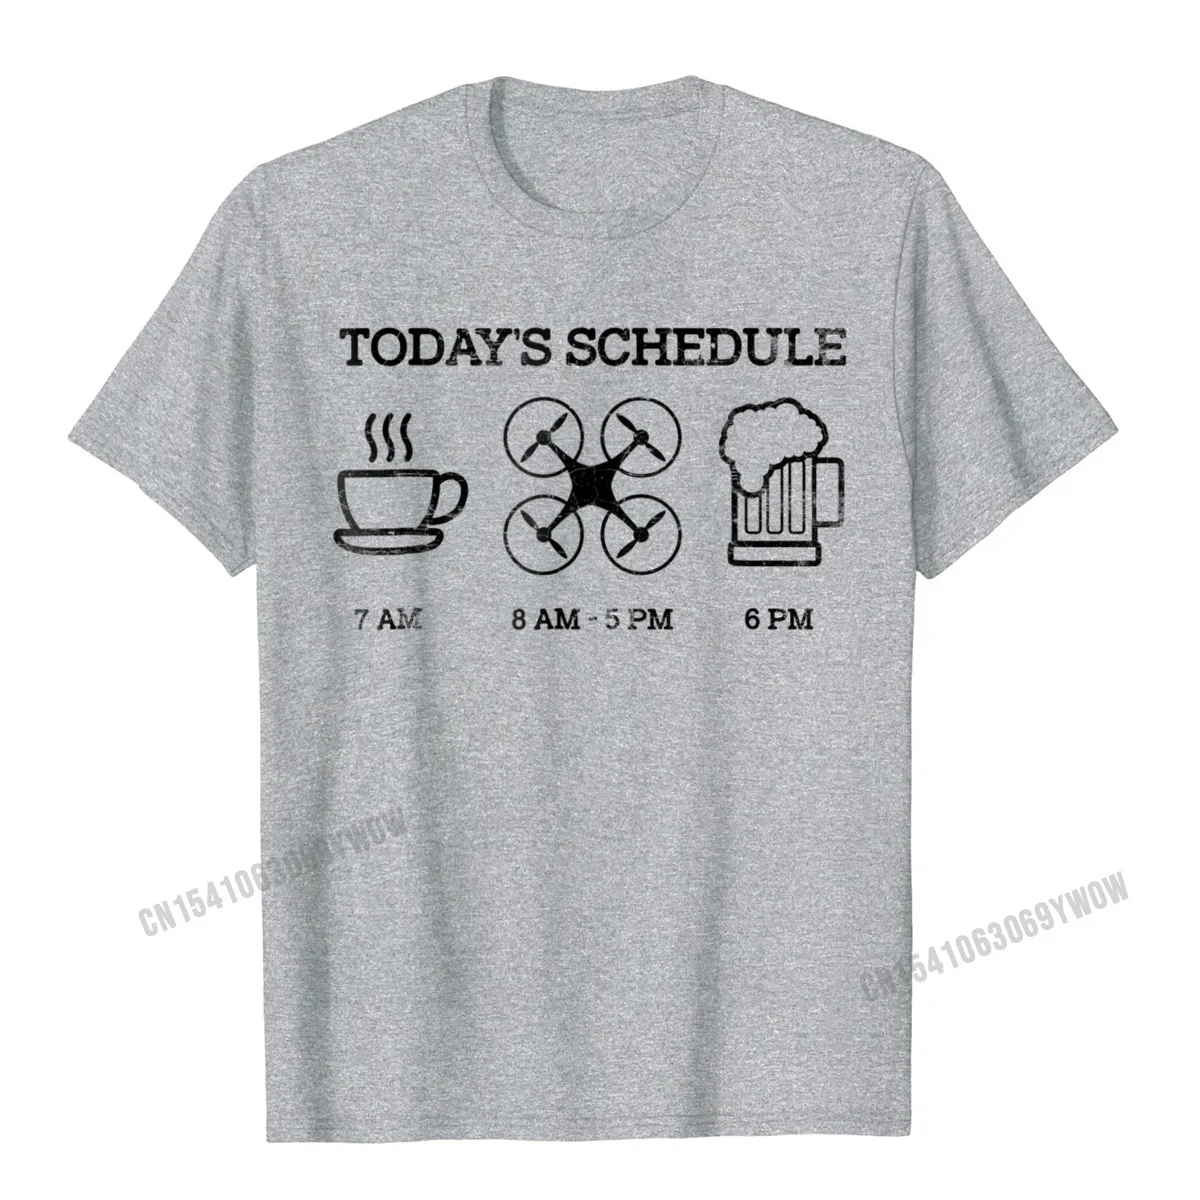 Comics Cotton Fabric Men Short Sleeve Tees Casual Thanksgiving Day Tshirts Cool T Shirt Latest Round Collar Top Quality Quadcopter Drone Flying Funny T Shirt - Todays Schedule__973 grey